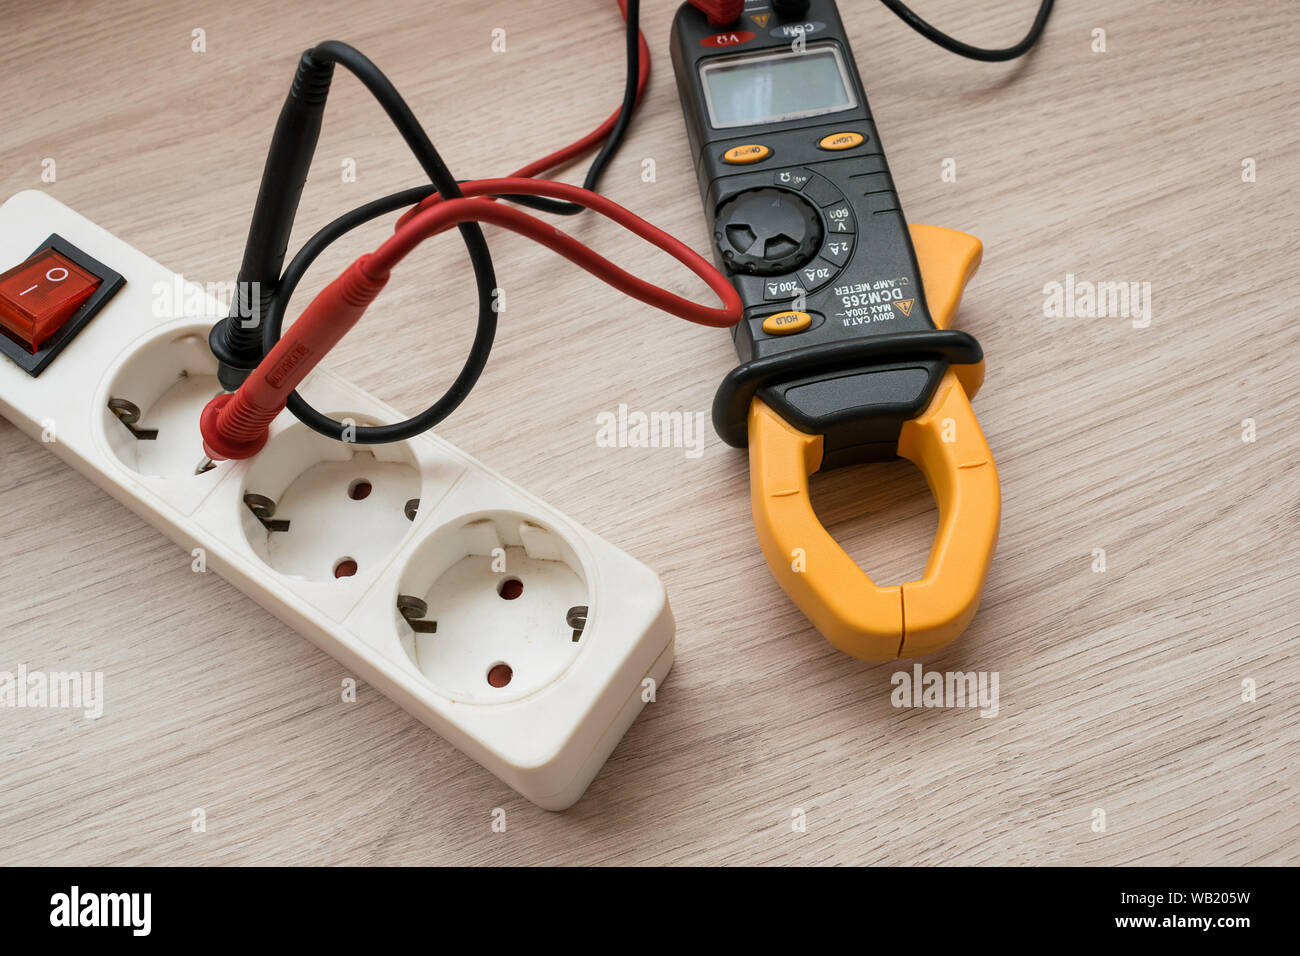 Clamp meter with Power strip on the wooden table Stock Photo